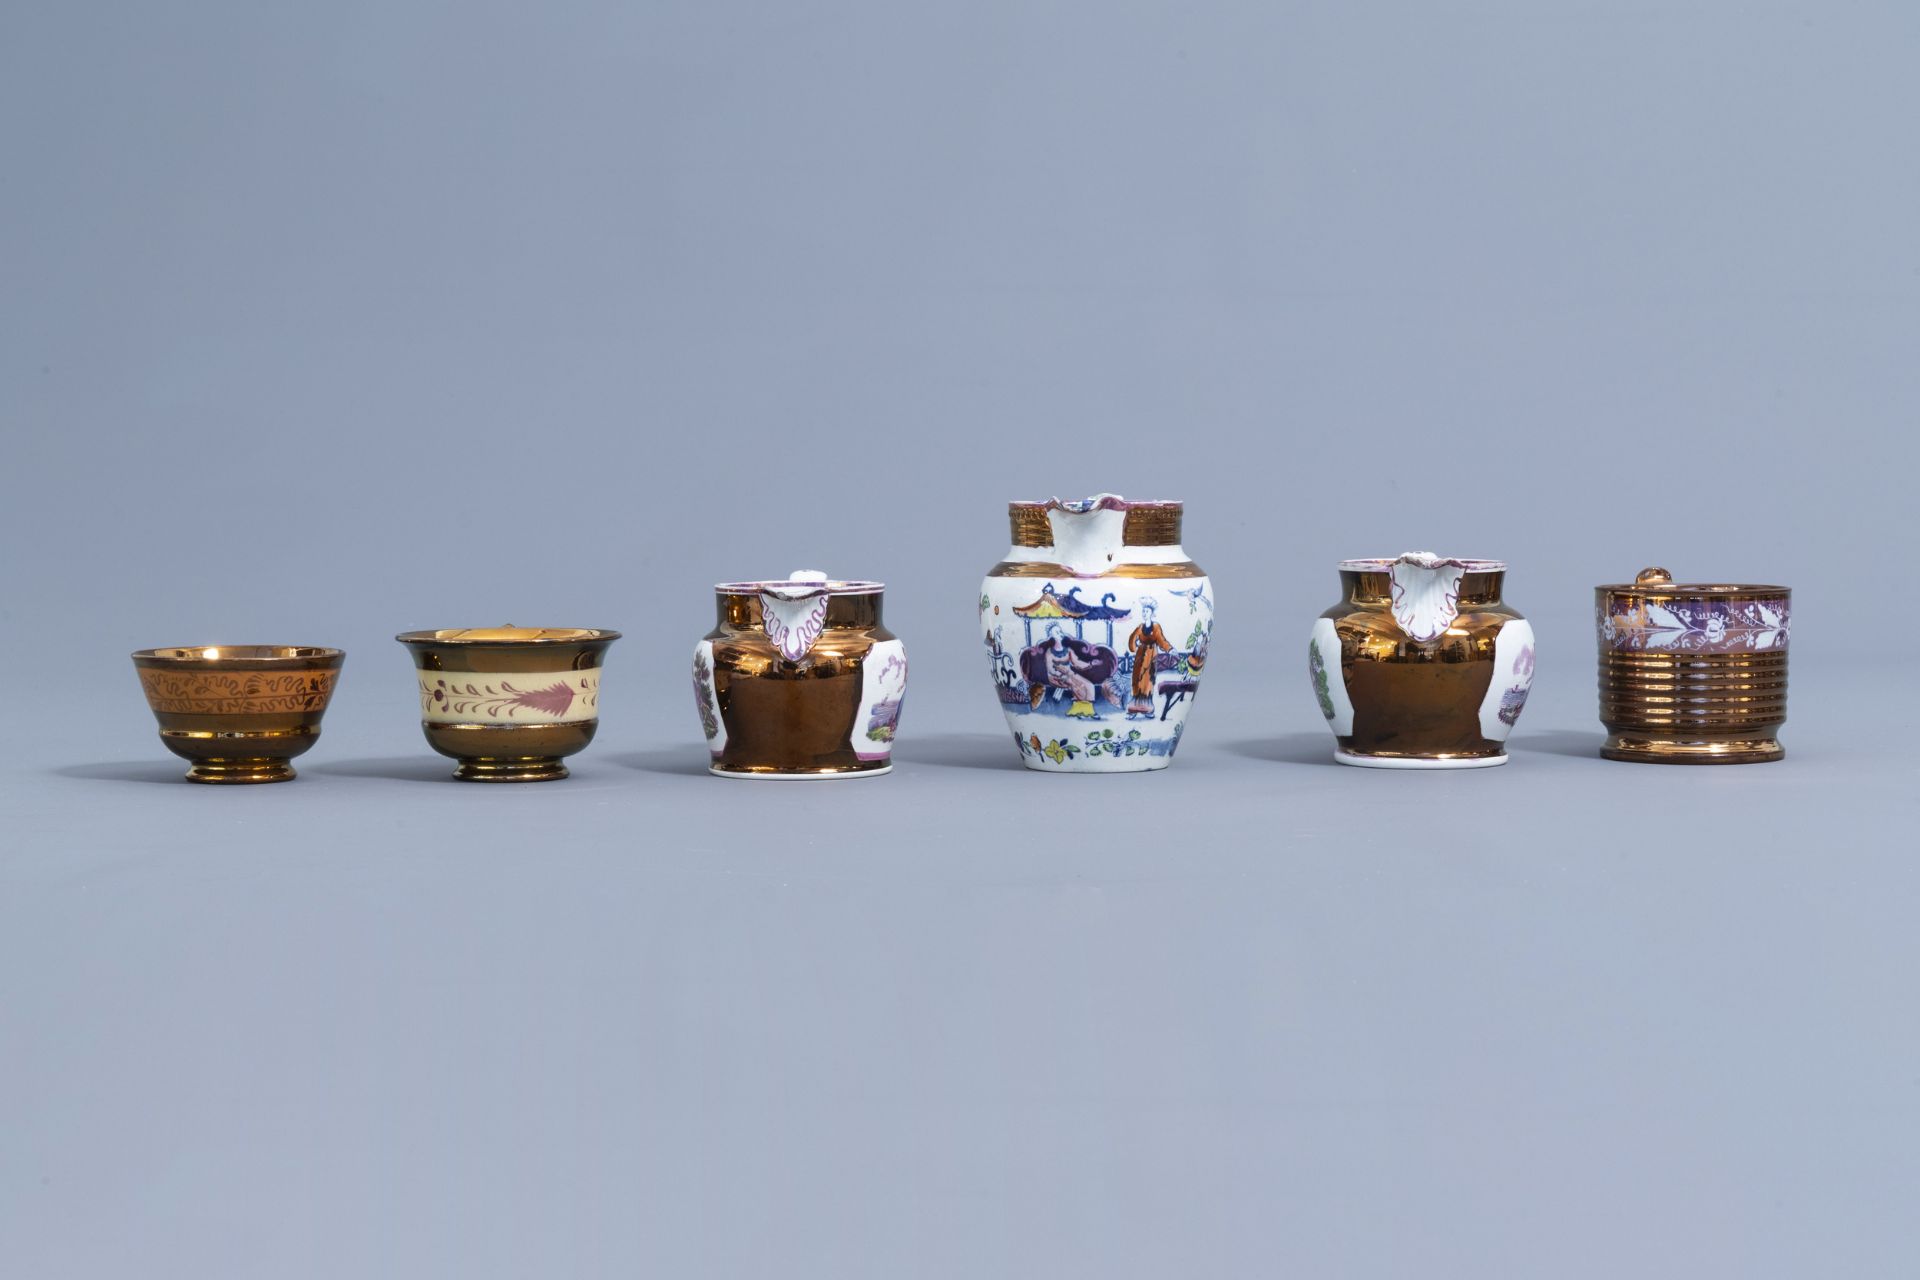 A varied collection of English lustreware items, 19th C. - Image 21 of 44